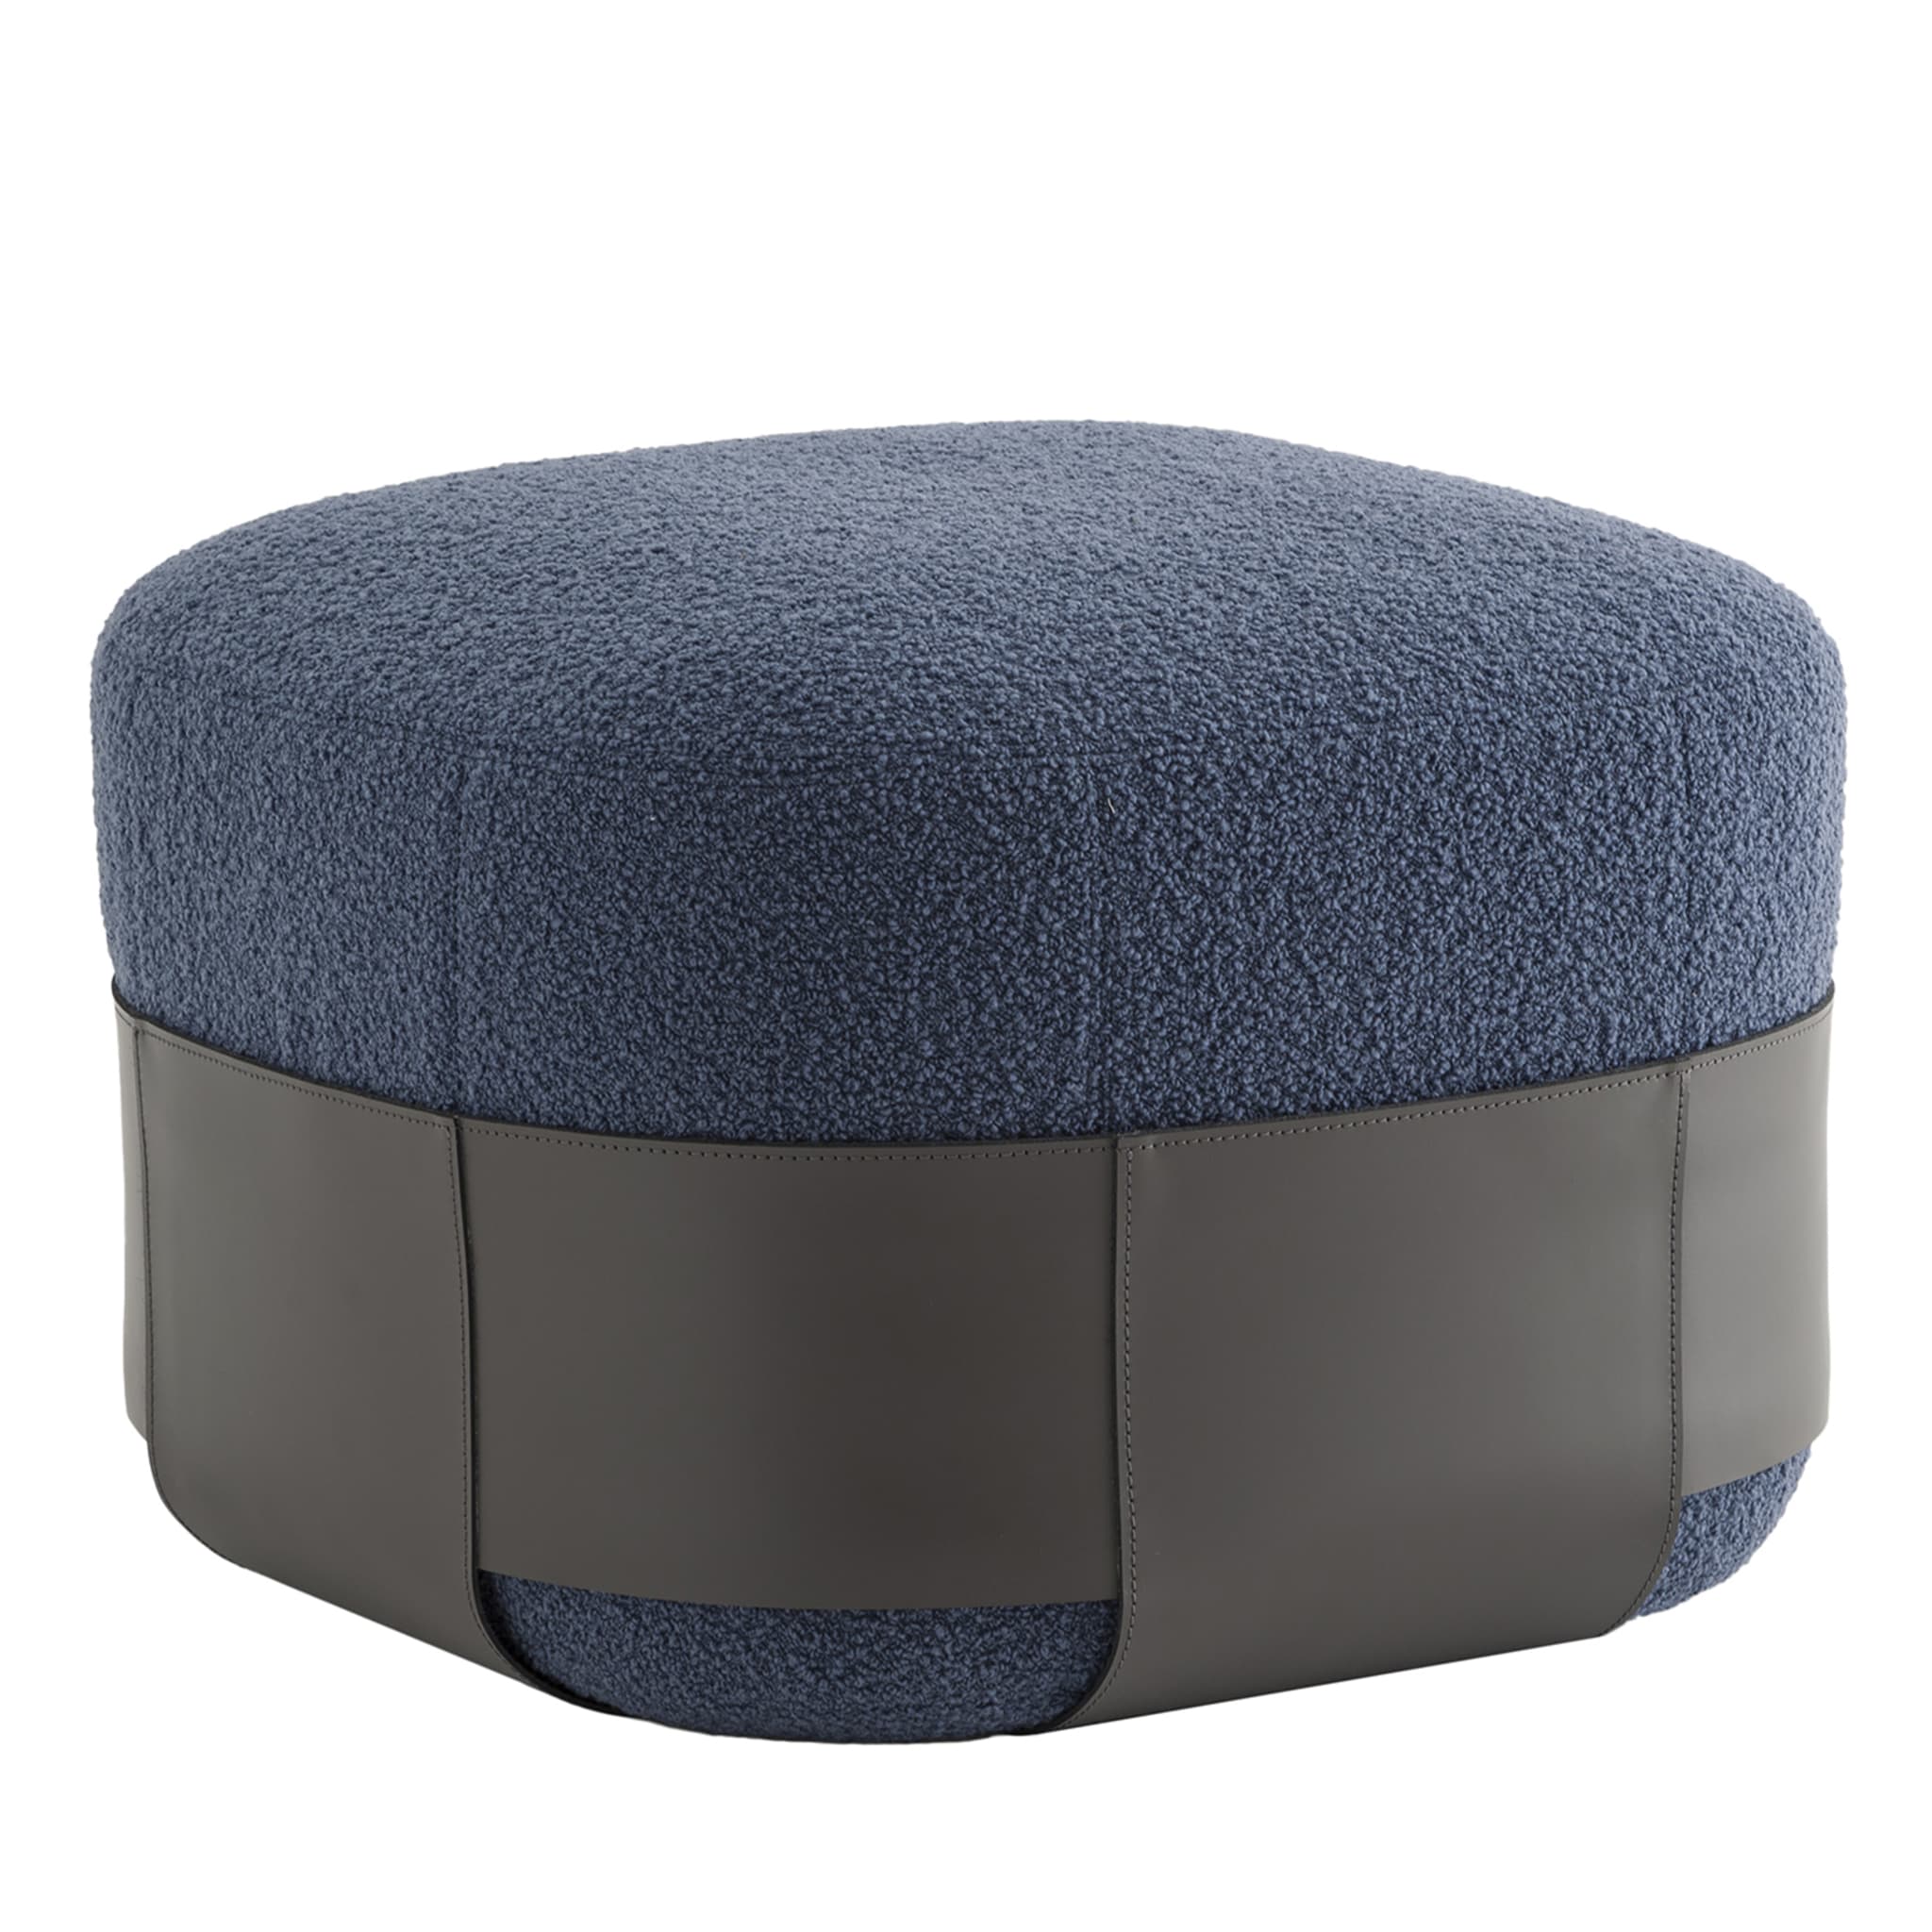 Sumo Anthracite & Blue Pouf - Main view